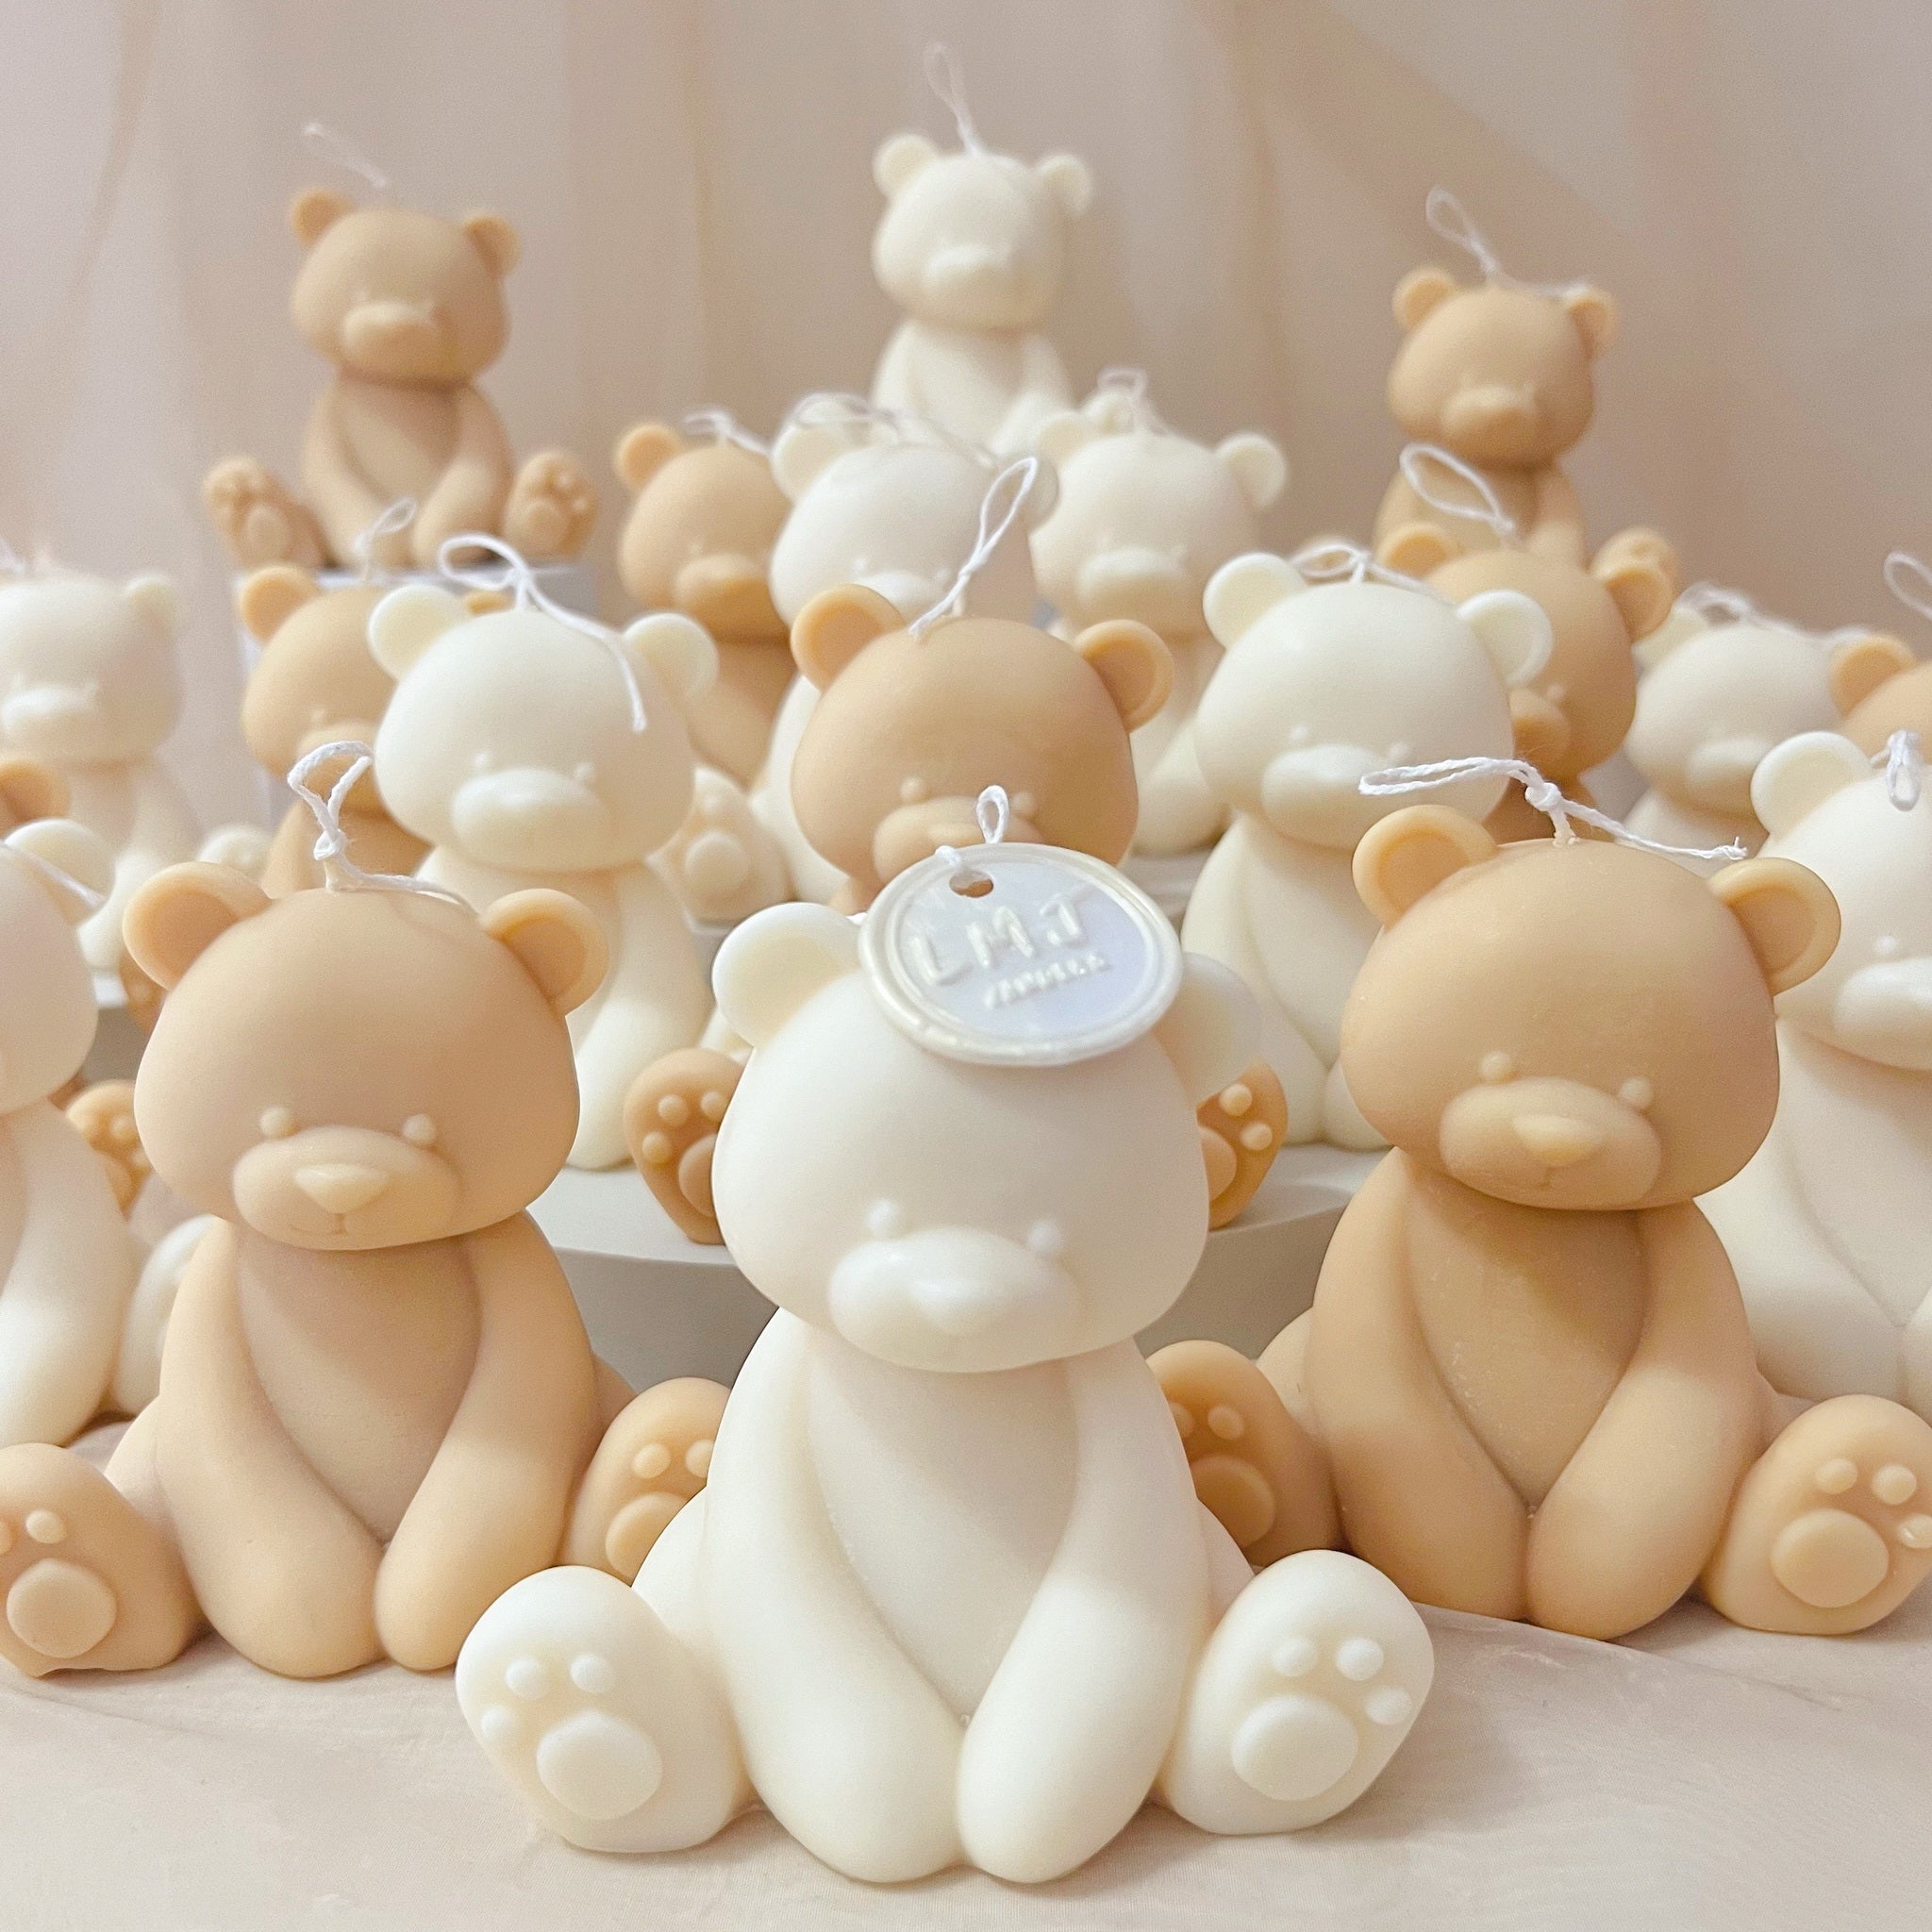 Scented Teddy Bear Soy Candle - LMJ Candles